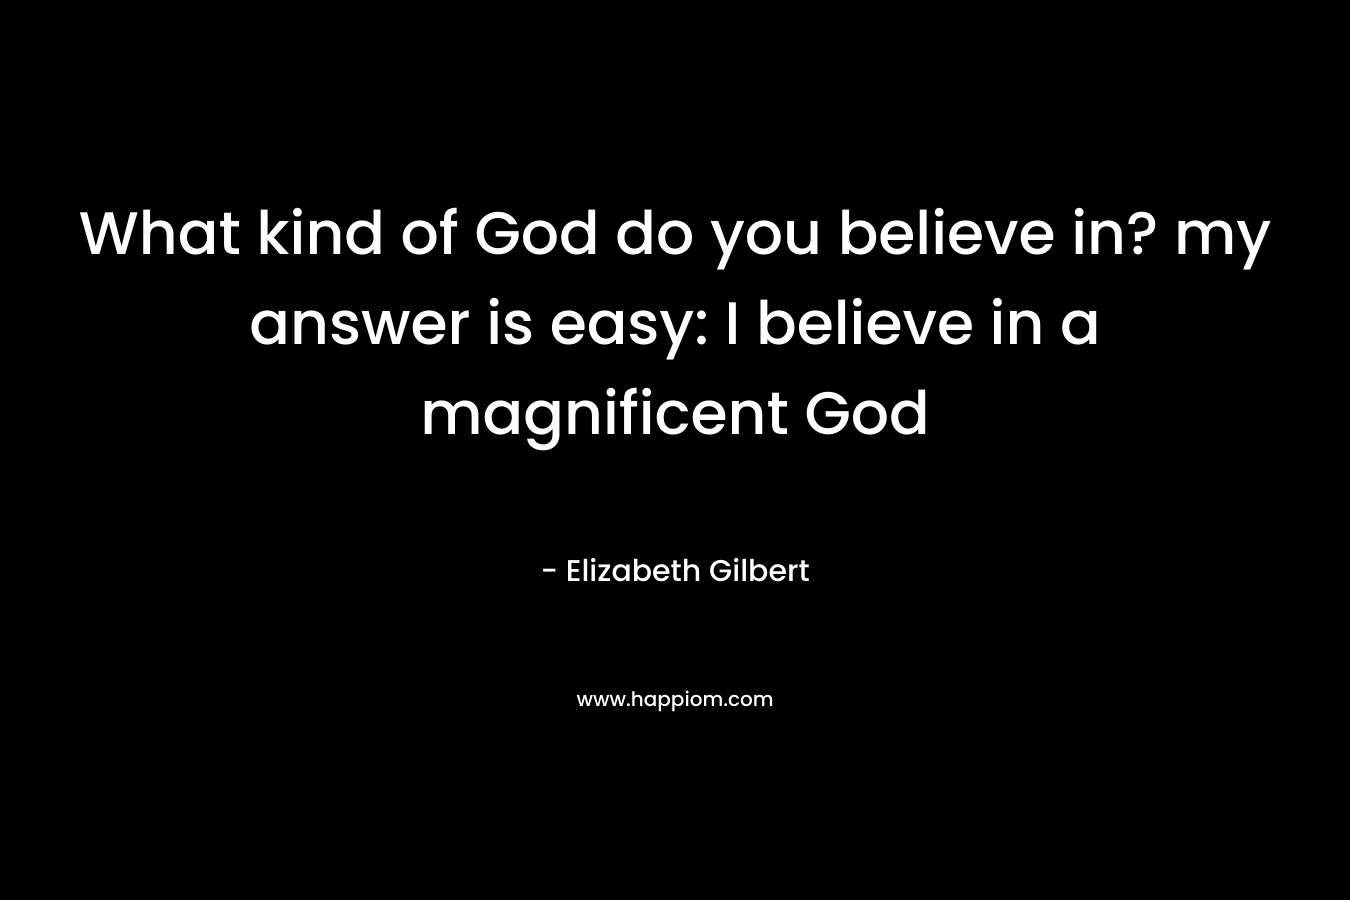 What kind of God do you believe in? my answer is easy: I believe in a magnificent God – Elizabeth Gilbert